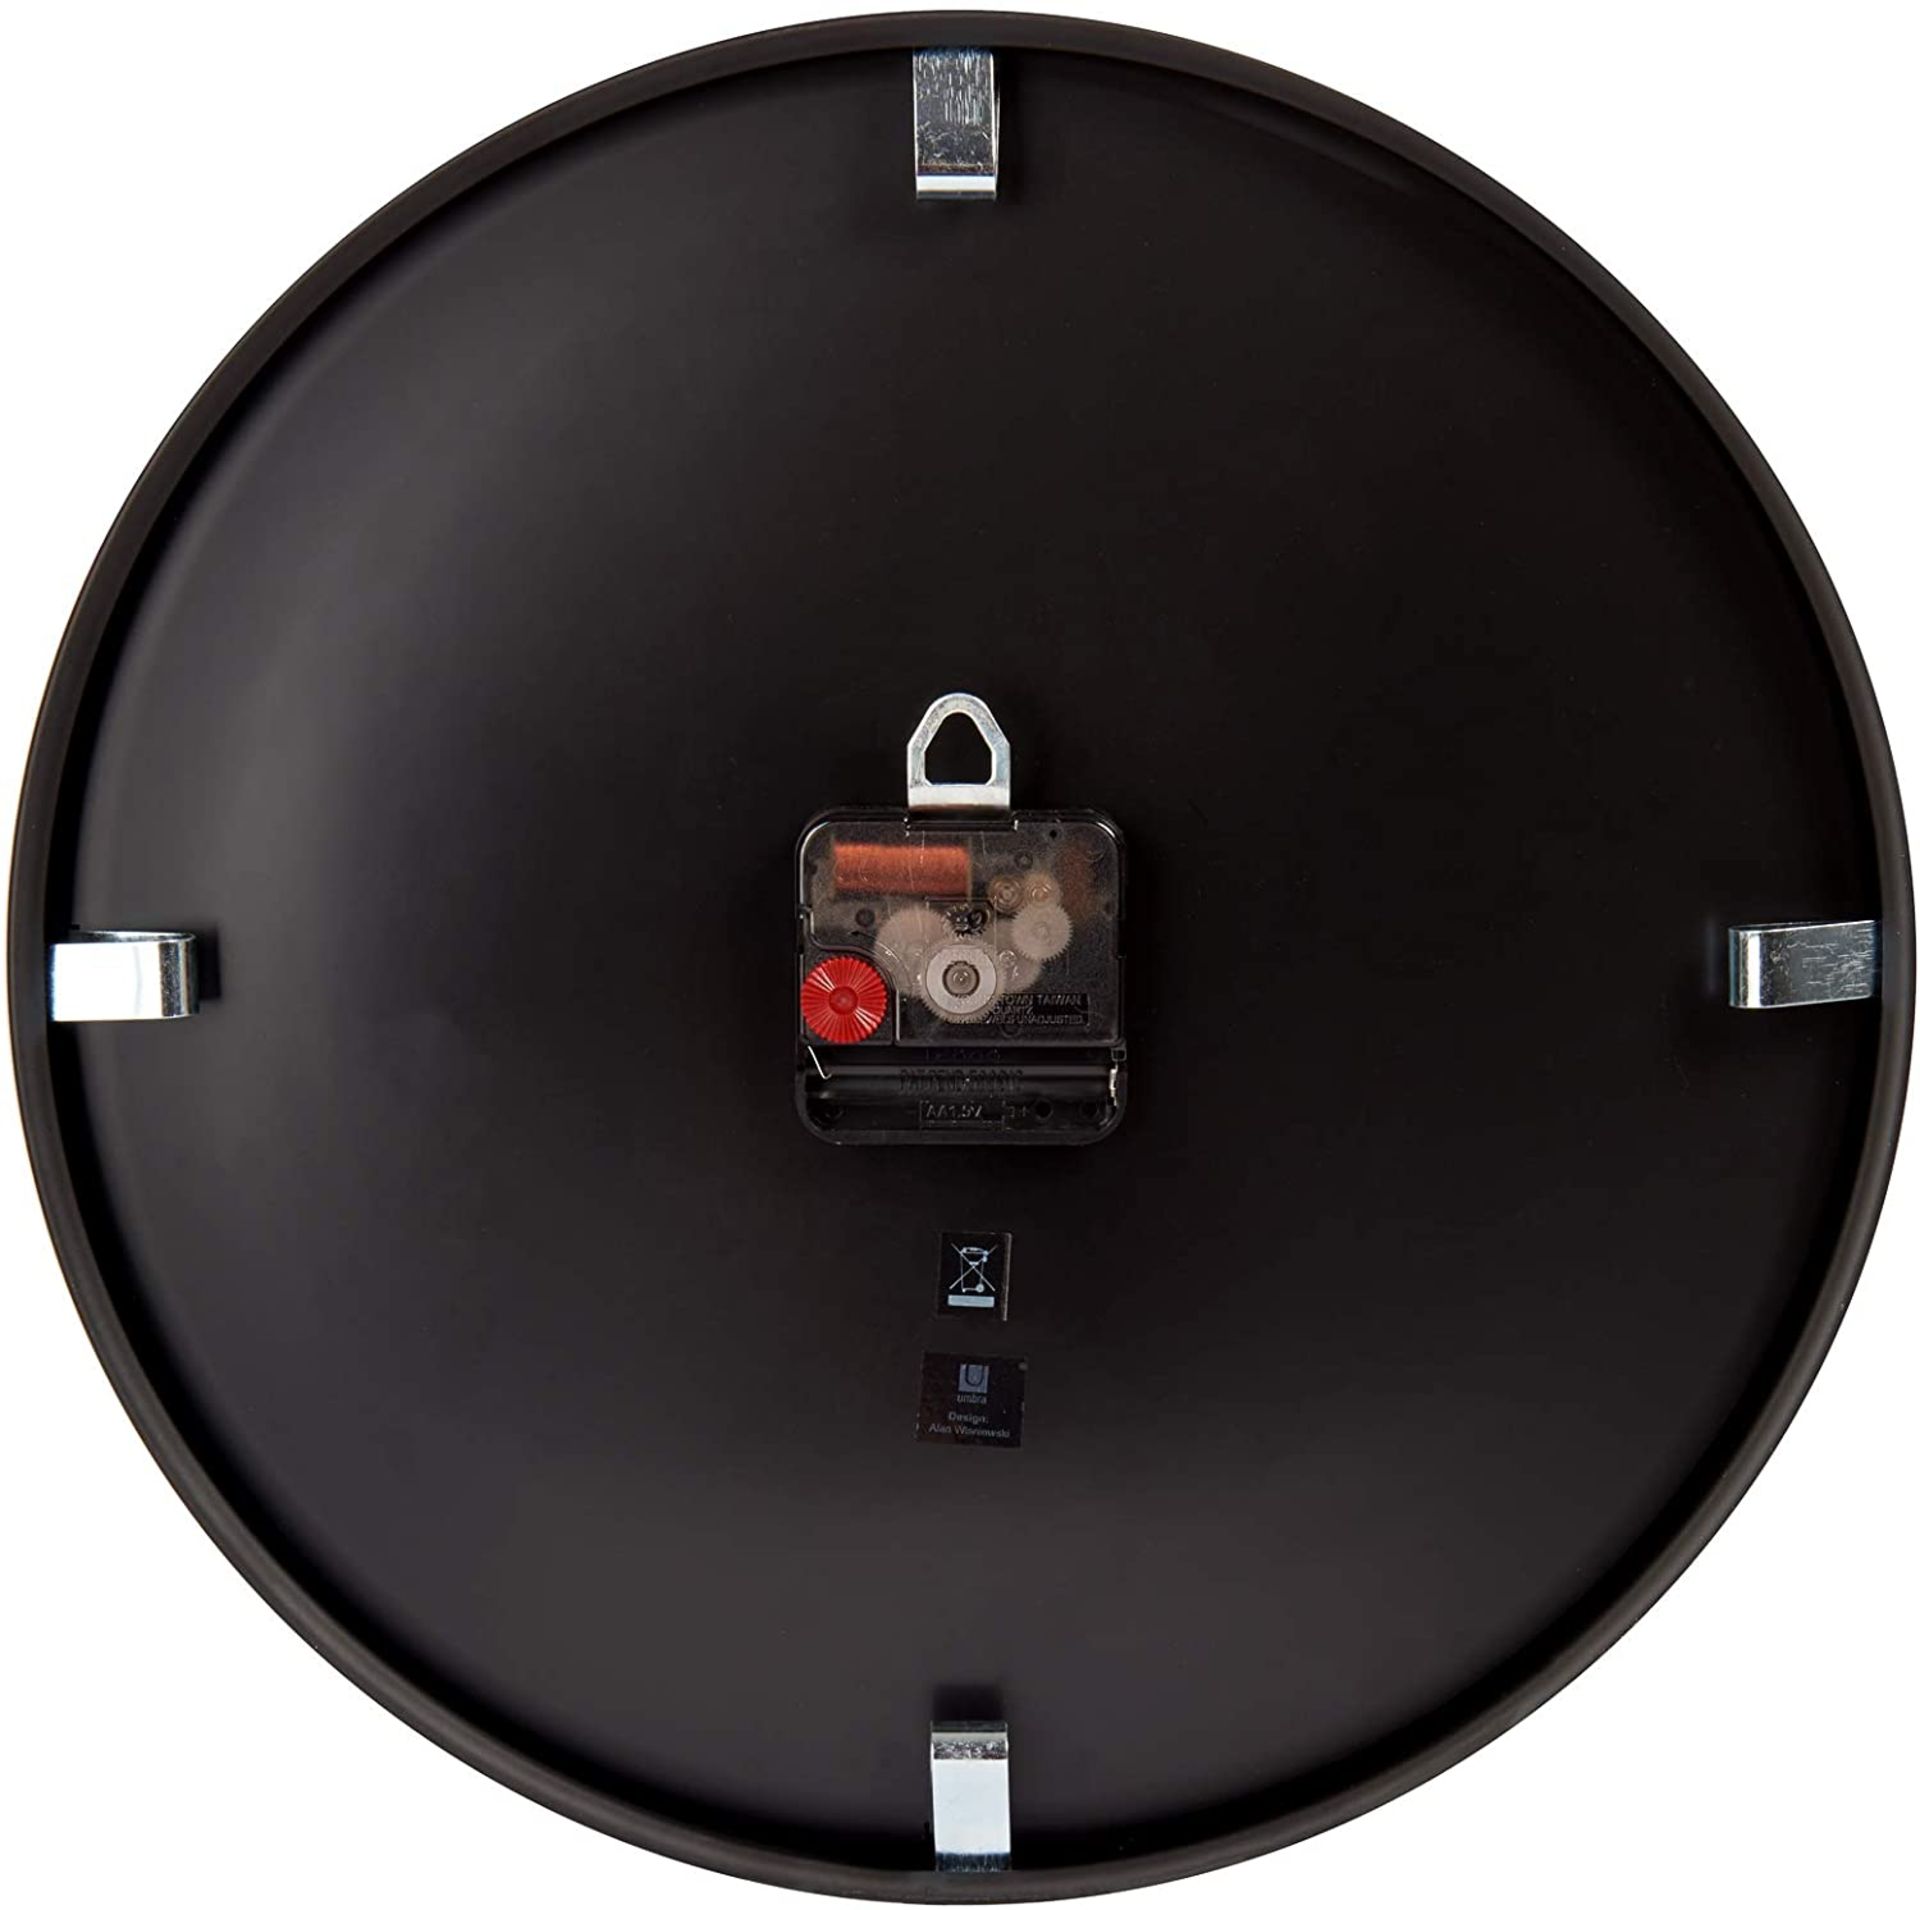 1 x 'Madera' Designer Wall Clock Featuring A Black Frame And Walnut Face - 32cm Diameter - Brand New - Image 5 of 5